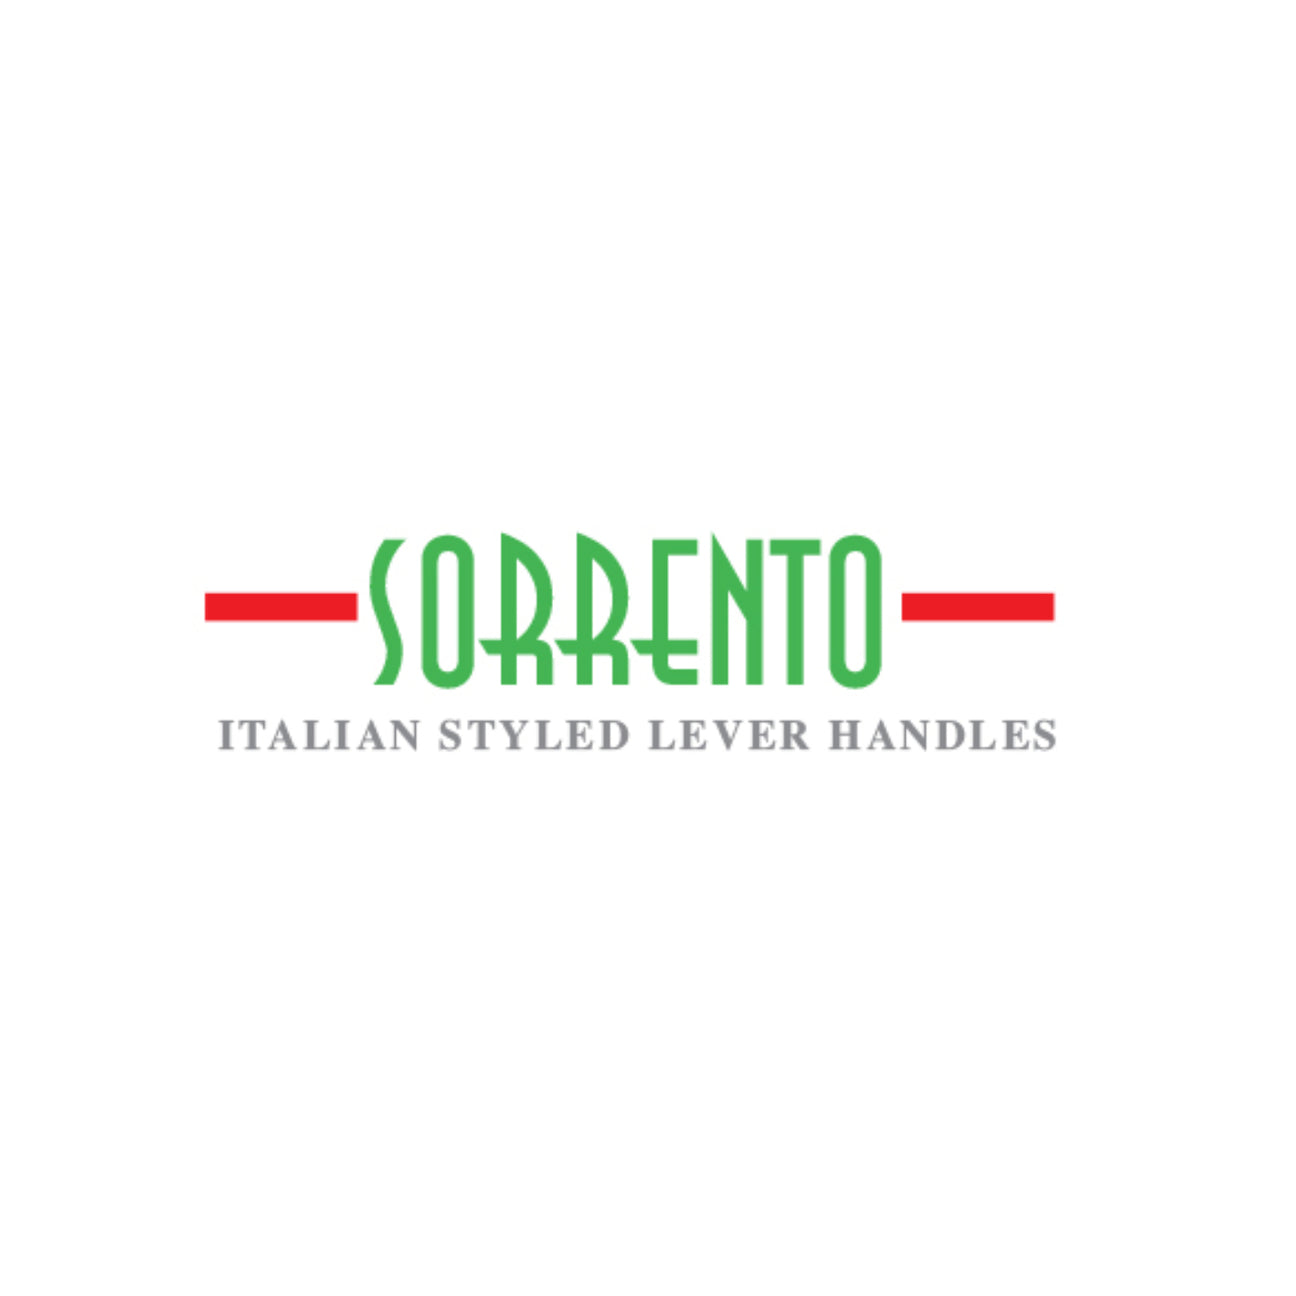 This is an image of the Sorrento logo